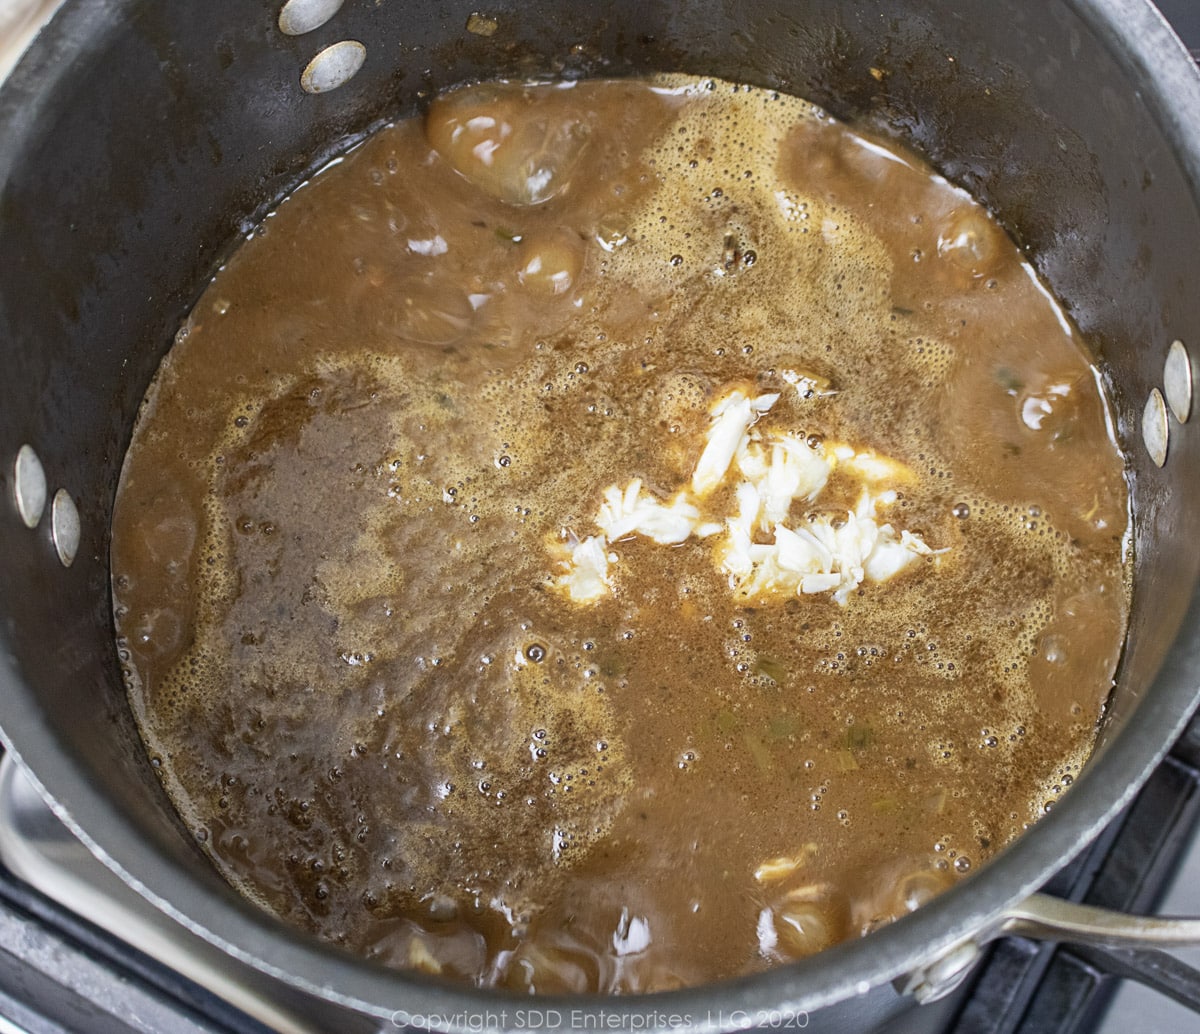 crabmeat added to seafood gumbo in a stockpot